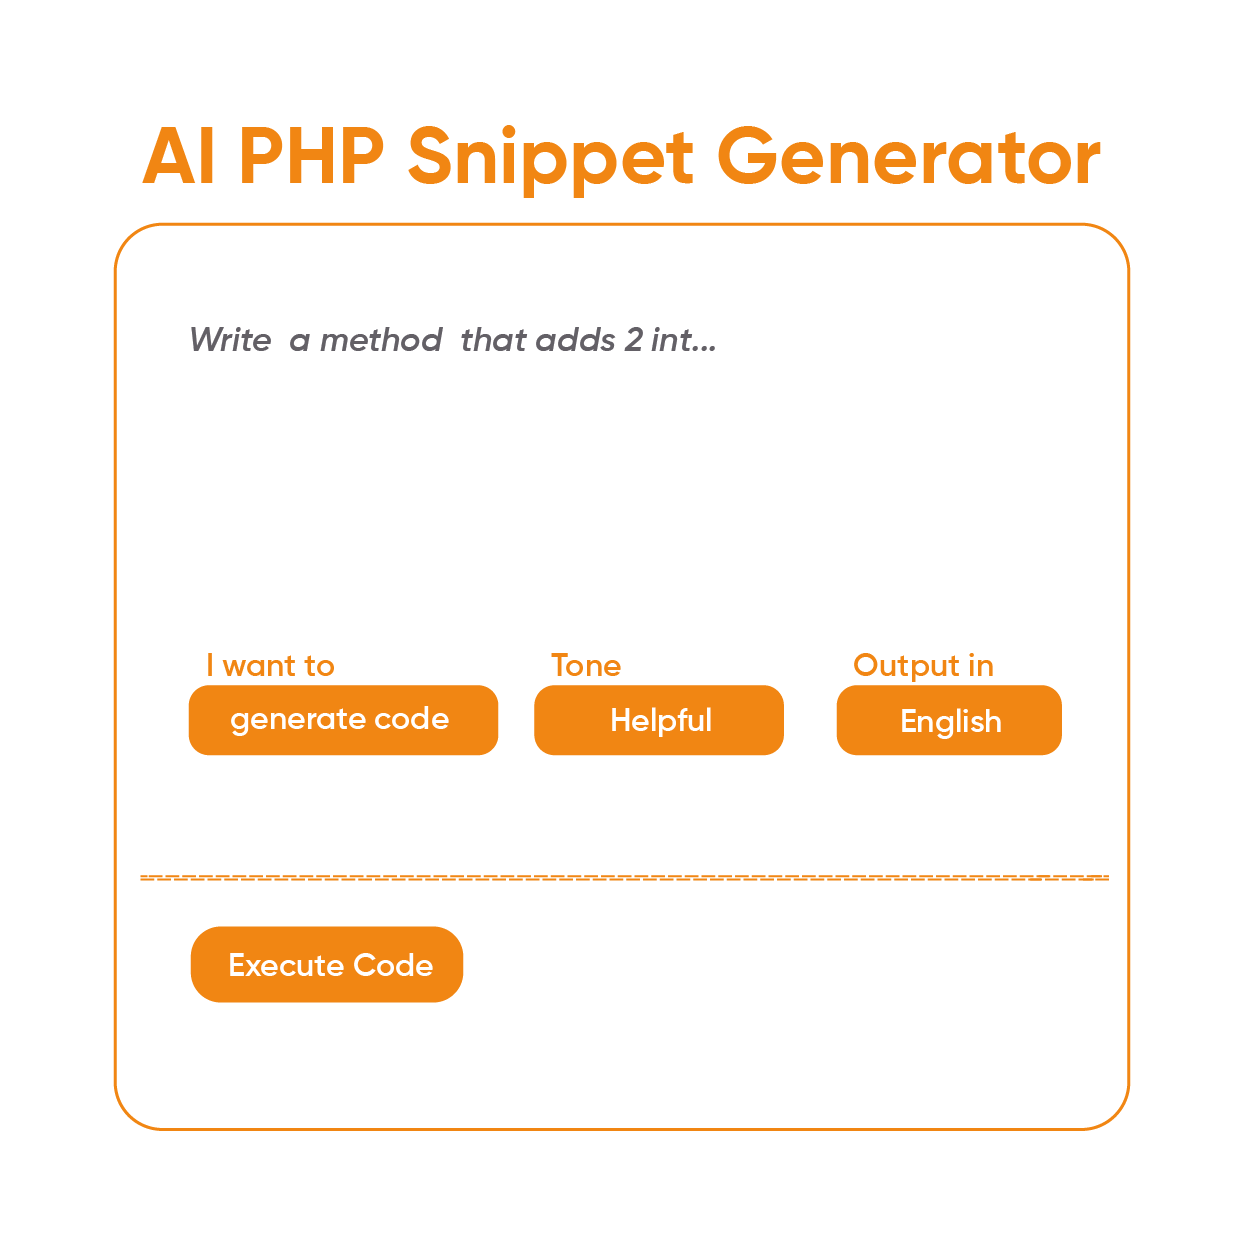 How to use Ettvi's AI PHP Snippet tool